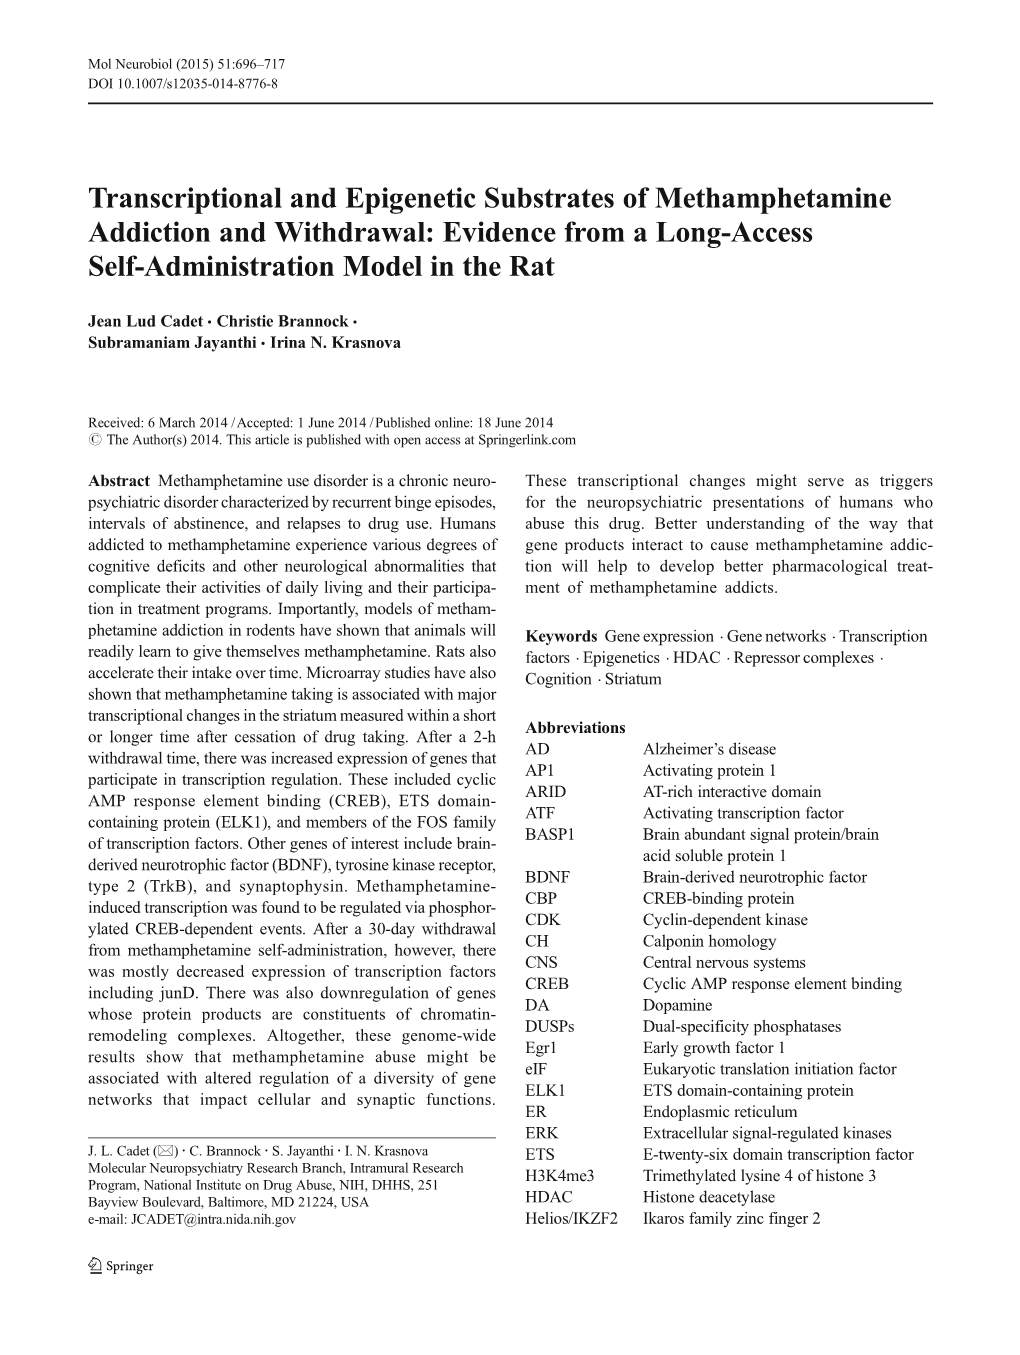 Transcriptional and Epigenetic Substrates of Methamphetamine Addiction and Withdrawal: Evidence from a Long-Access Self-Administration Model in the Rat